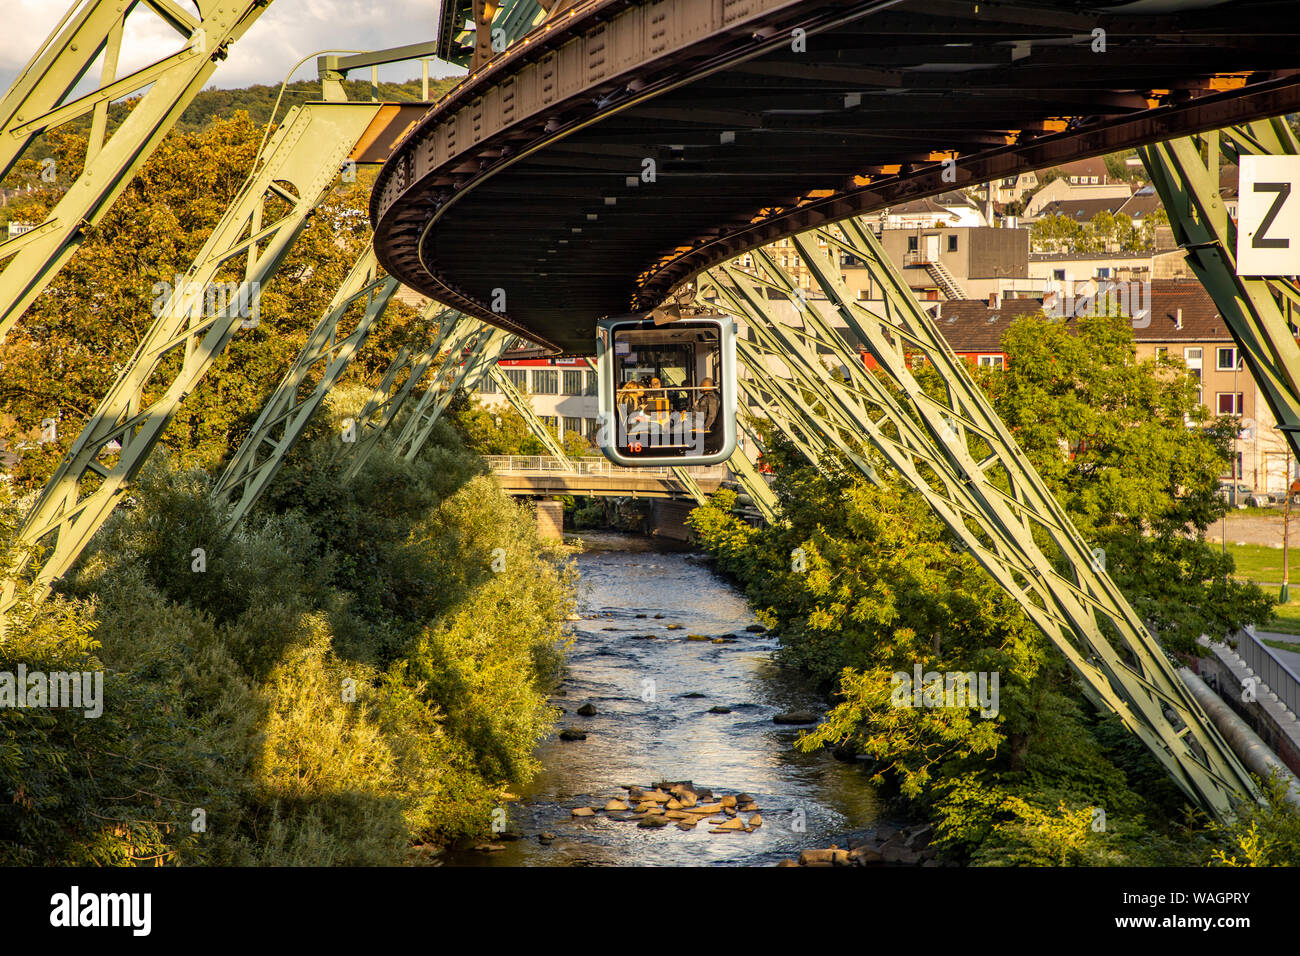 The Wuppertal suspension railway, train of the latest generation 15, Wuppertal, Germany, over river Wupper, Stock Photo